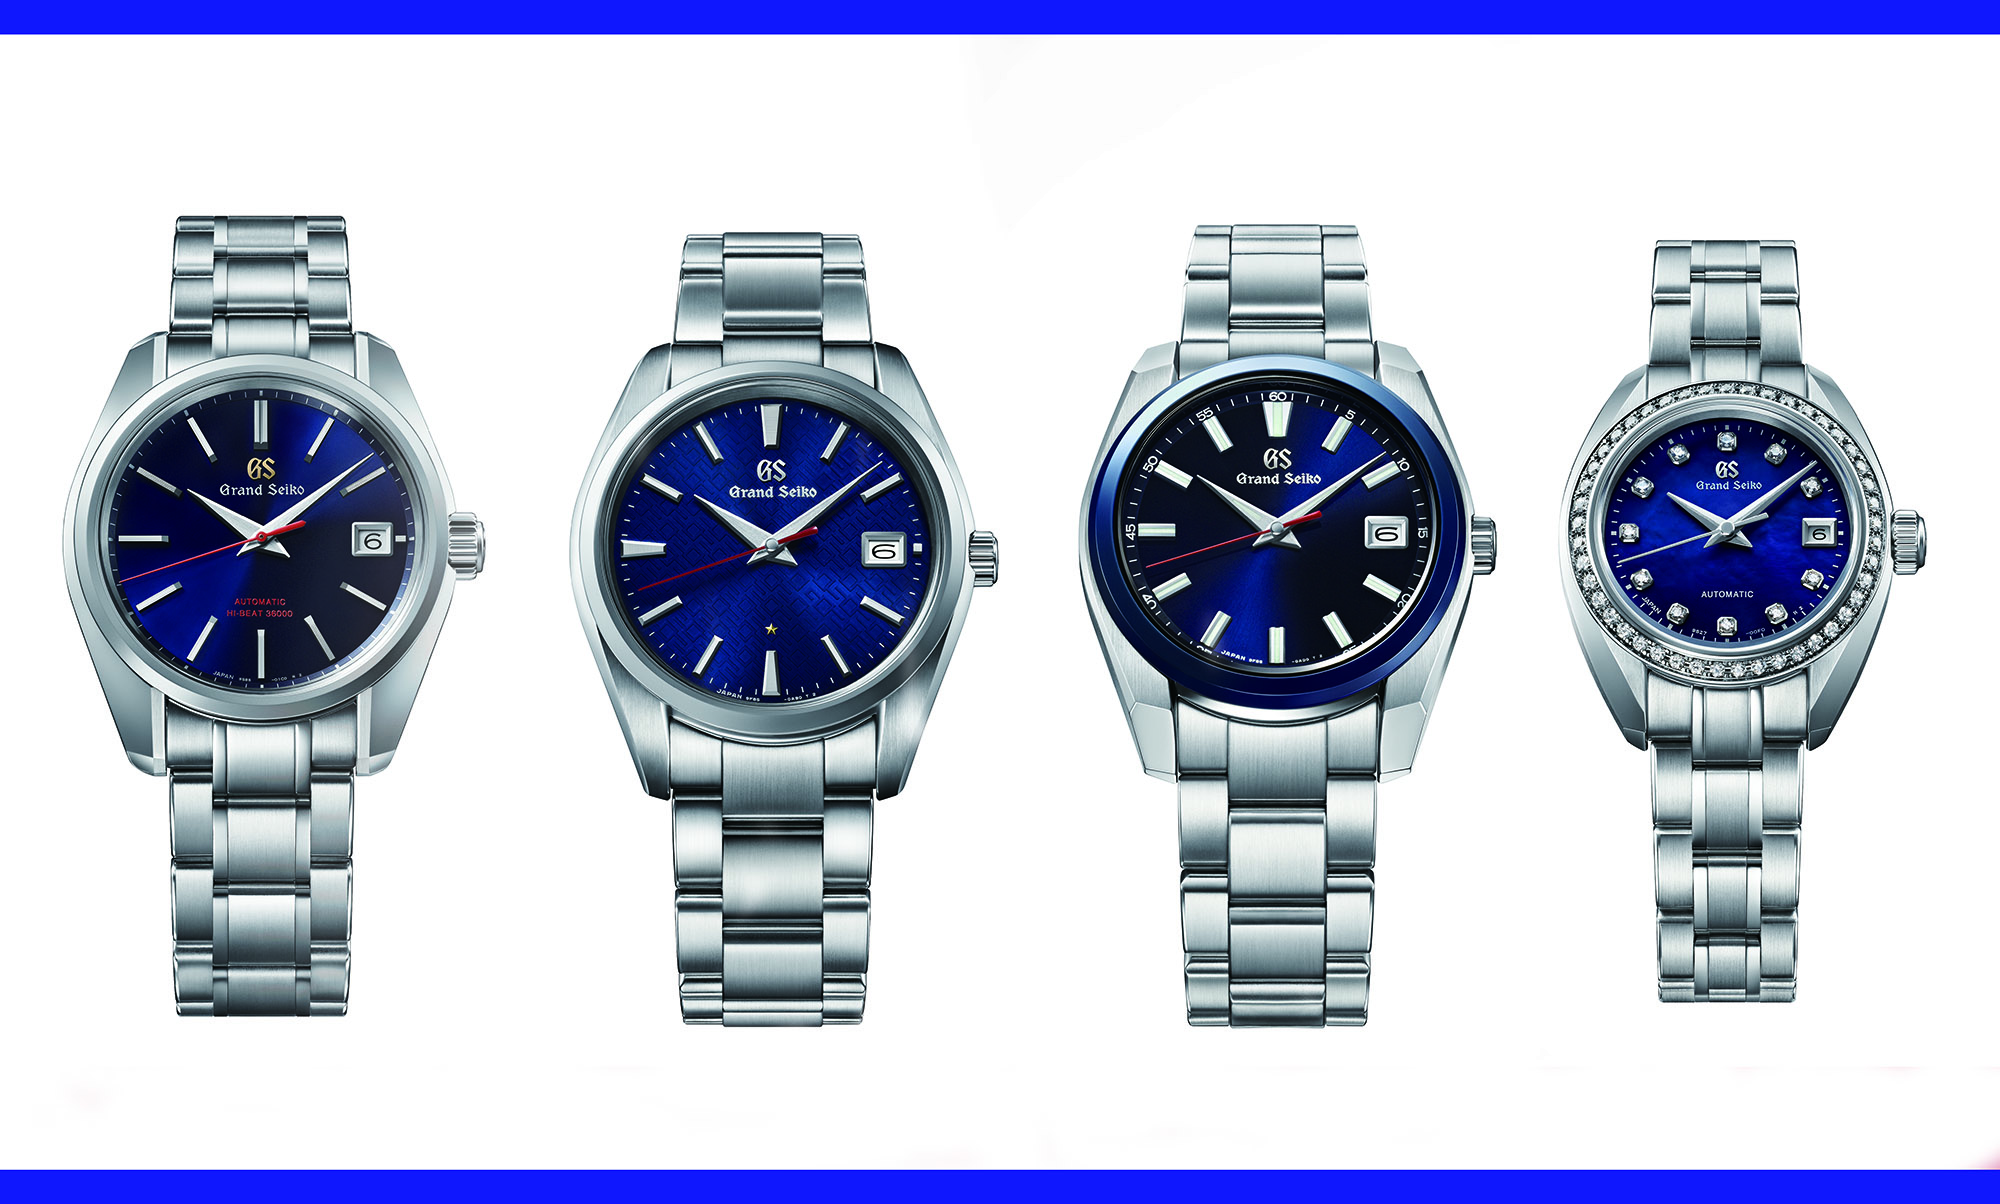 Four new Grand Seiko 60th Anniversary Limited Editions for 2020